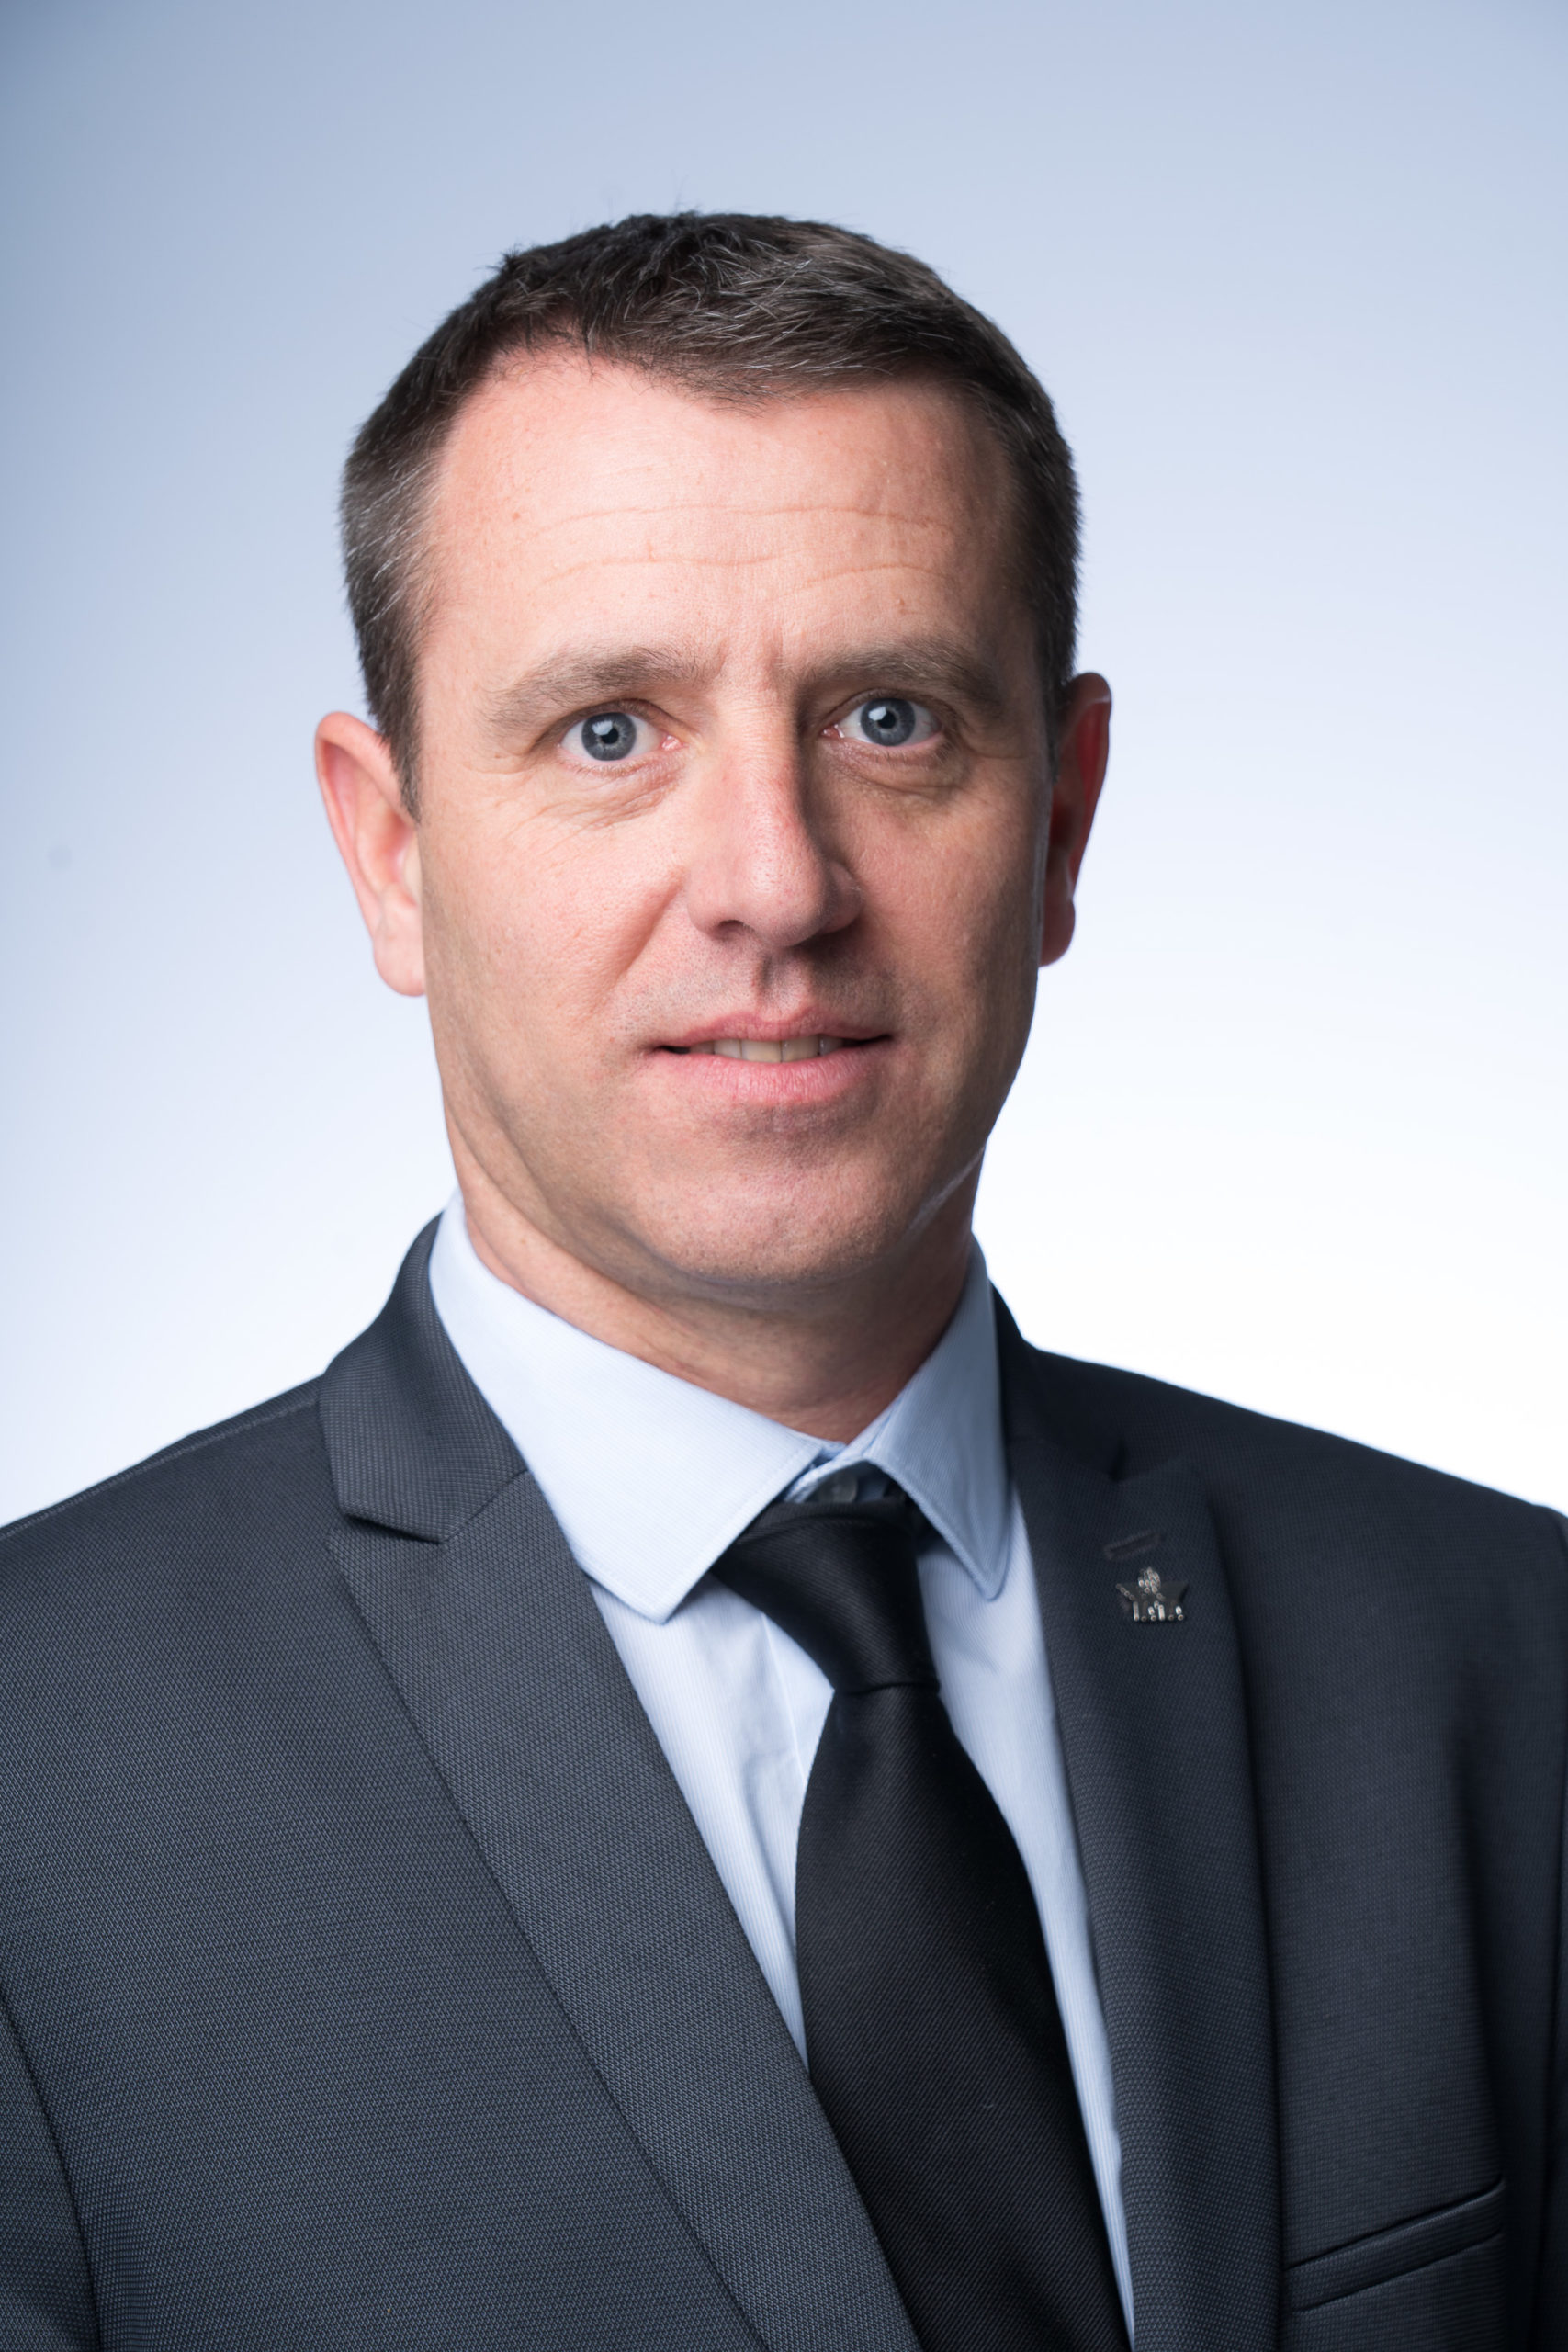 IATA Appoints Frederic Leger As SVP For Commercial Products & Services